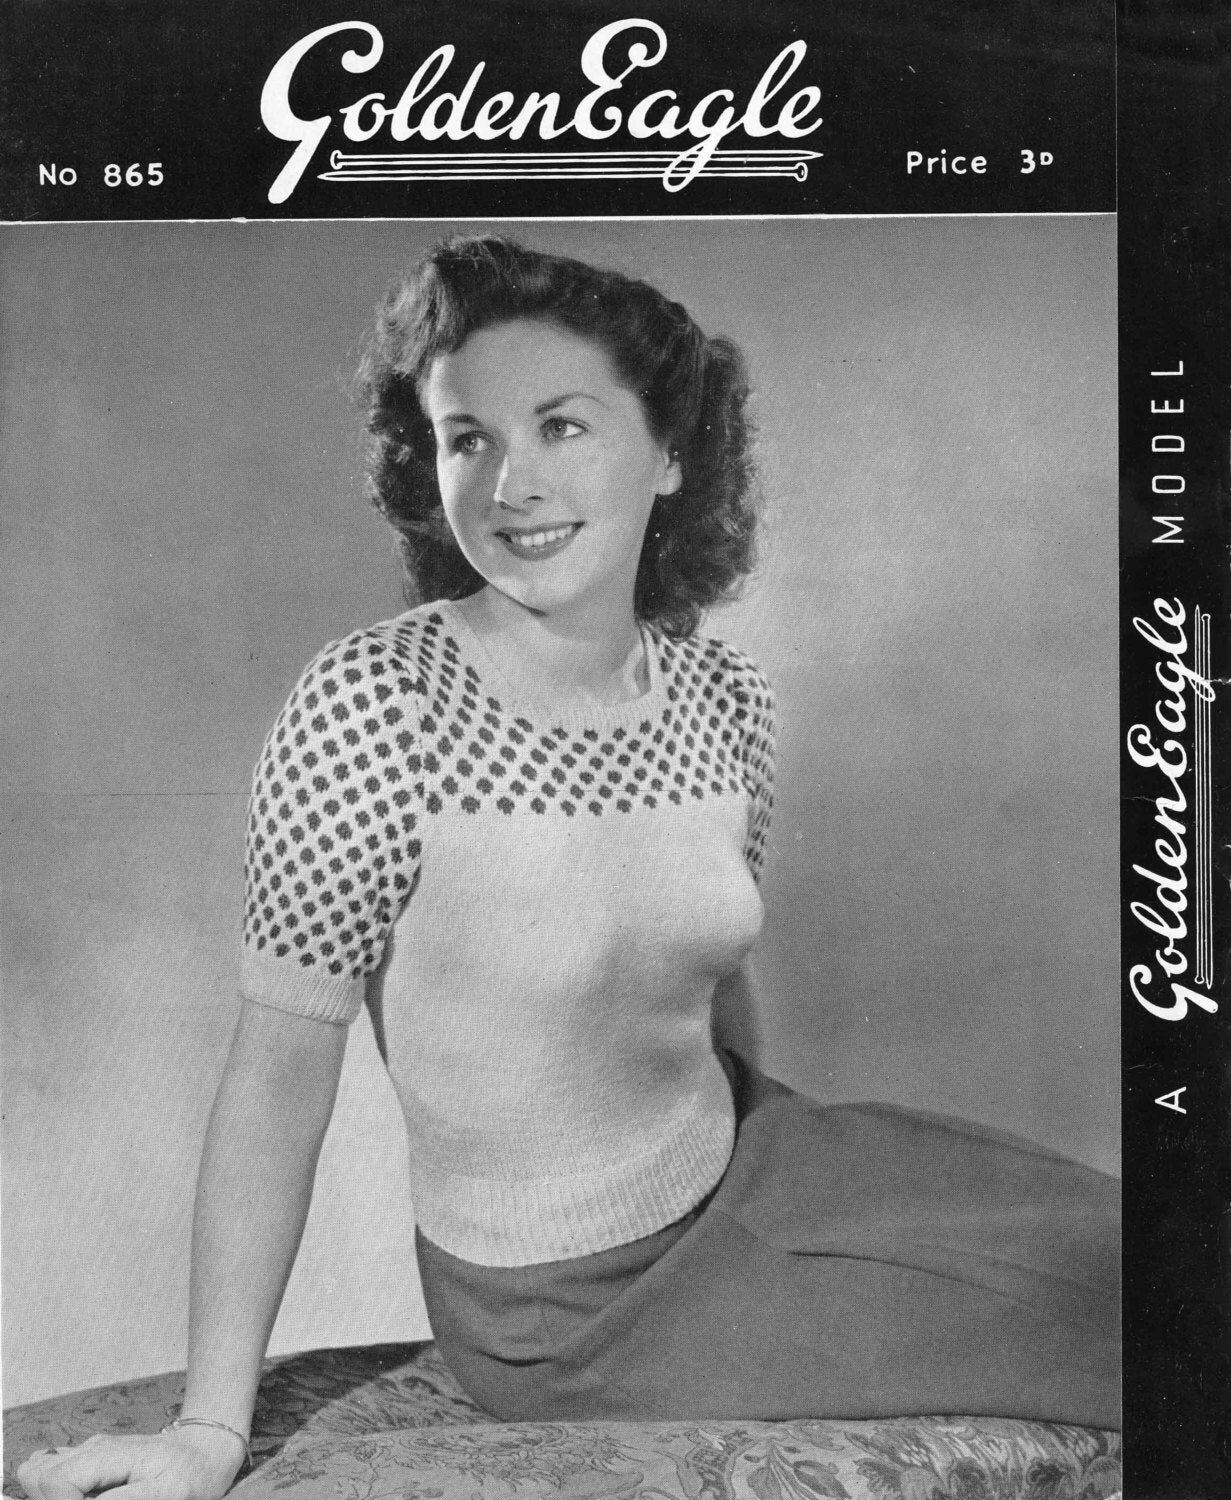 Ladies Jumper, 34"/36" Bust, 3ply, 50s Knitting Pattern, Golden Eagle 865